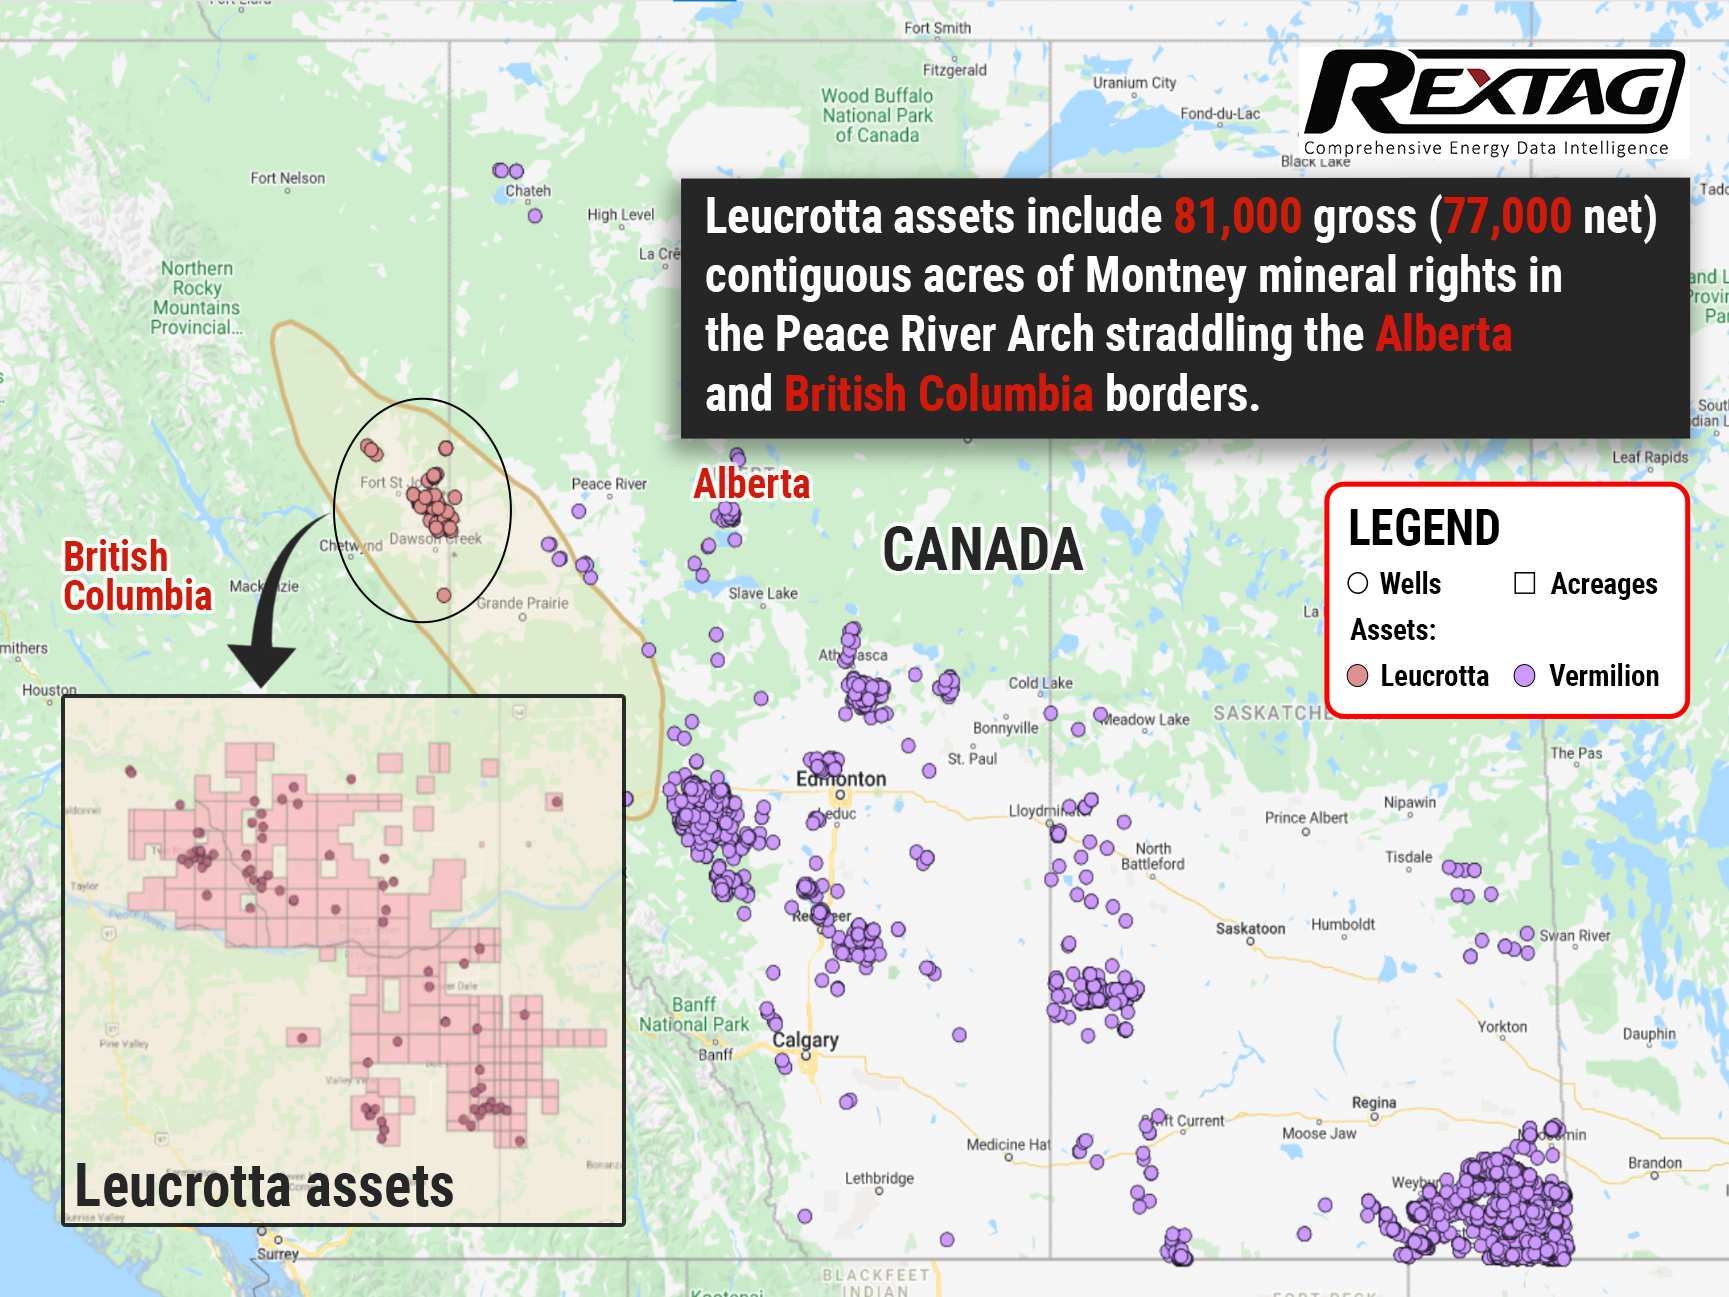 Decades-of-free-inventory-from-one-deal-Vermilion-Energy-buys-Leucrotta-Exploration-for-$477-million